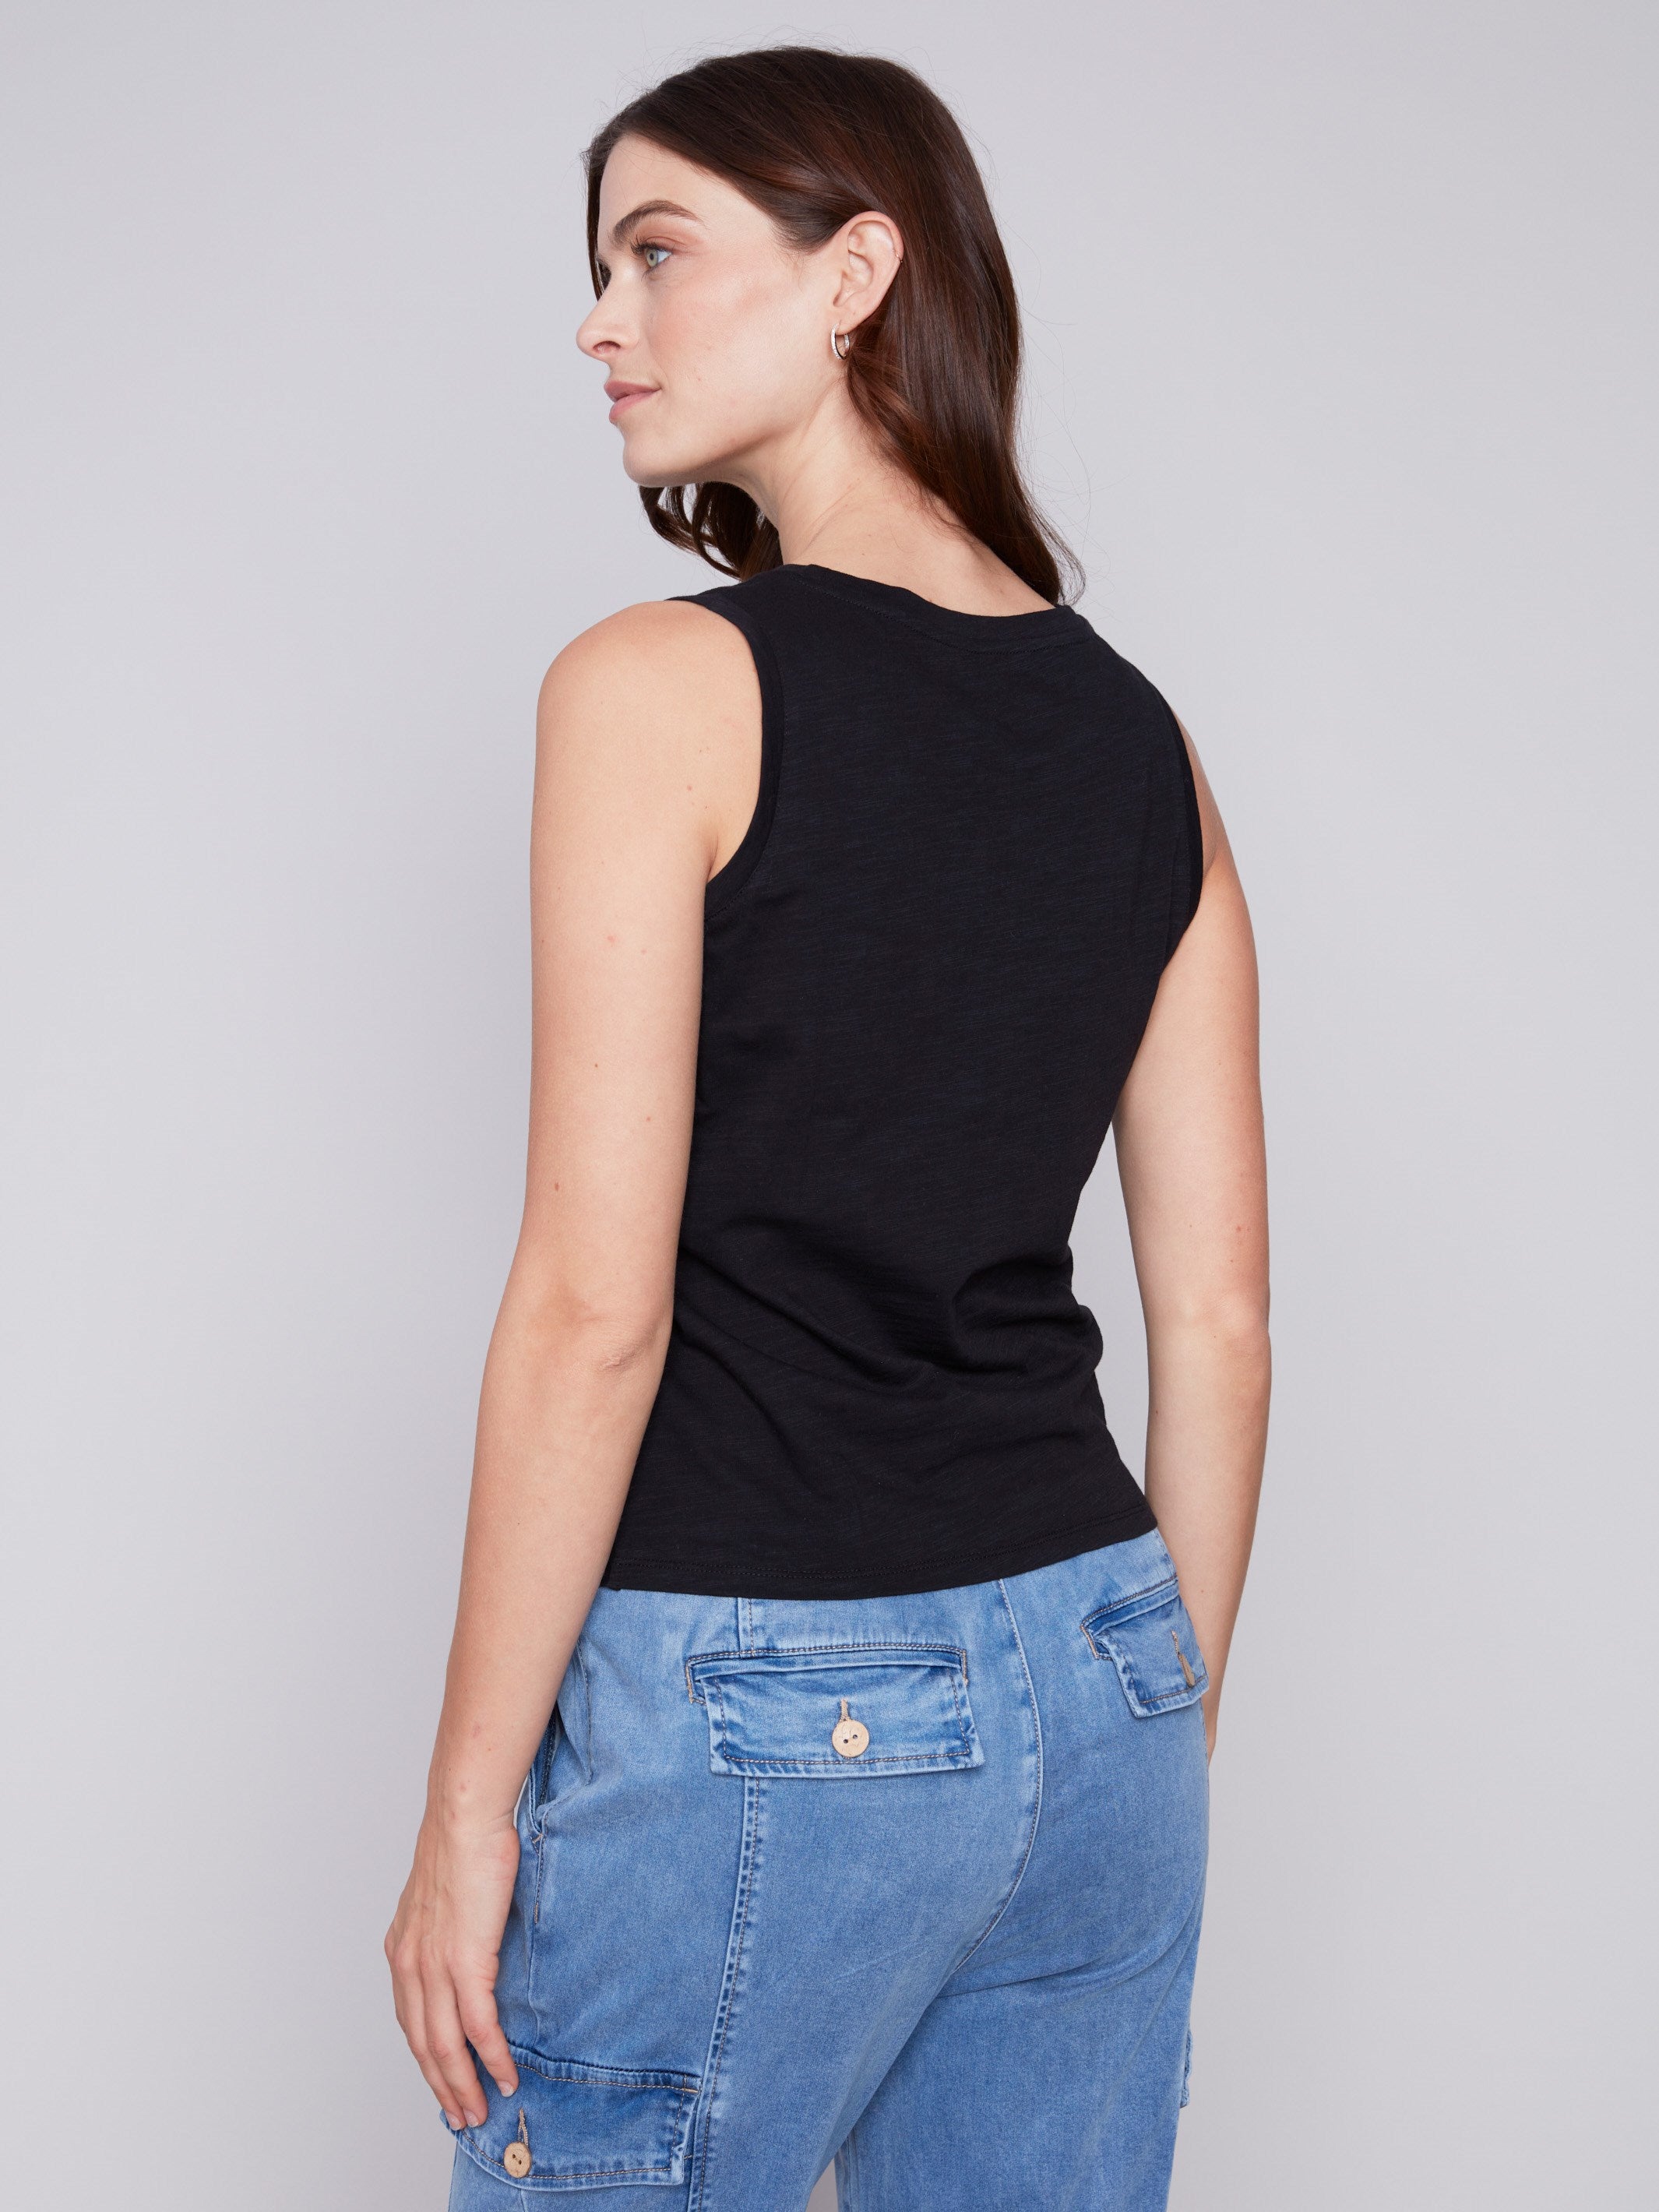 Charlie B Organic Cotton Tank Top With Knot Detail - Black - Image 2